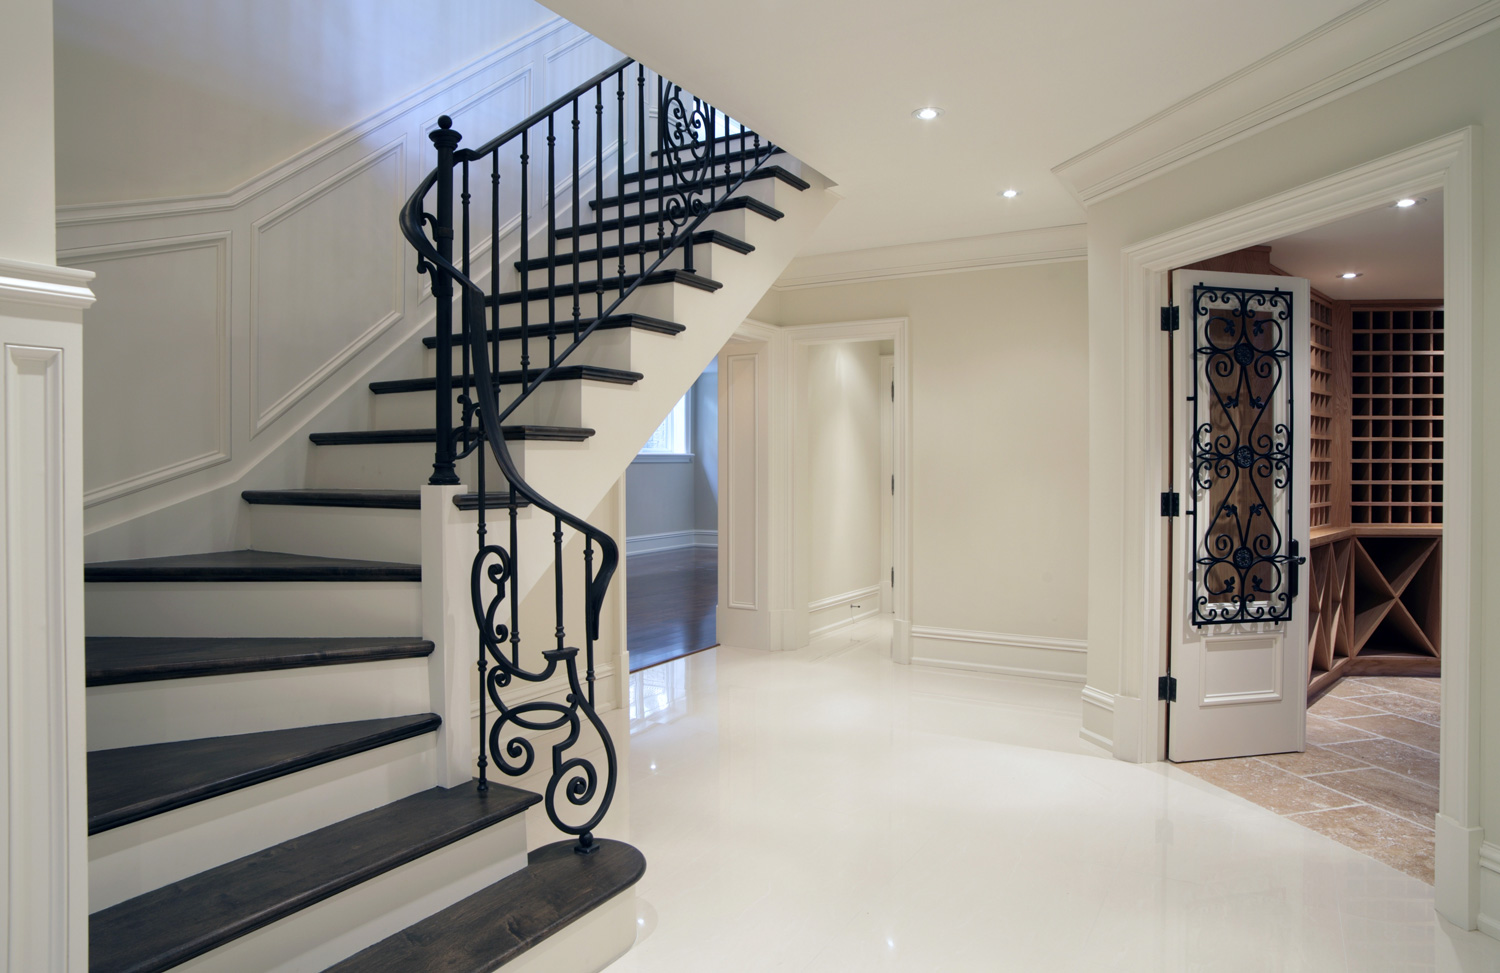 Hallway Interior of brand new mansion residence in North America.